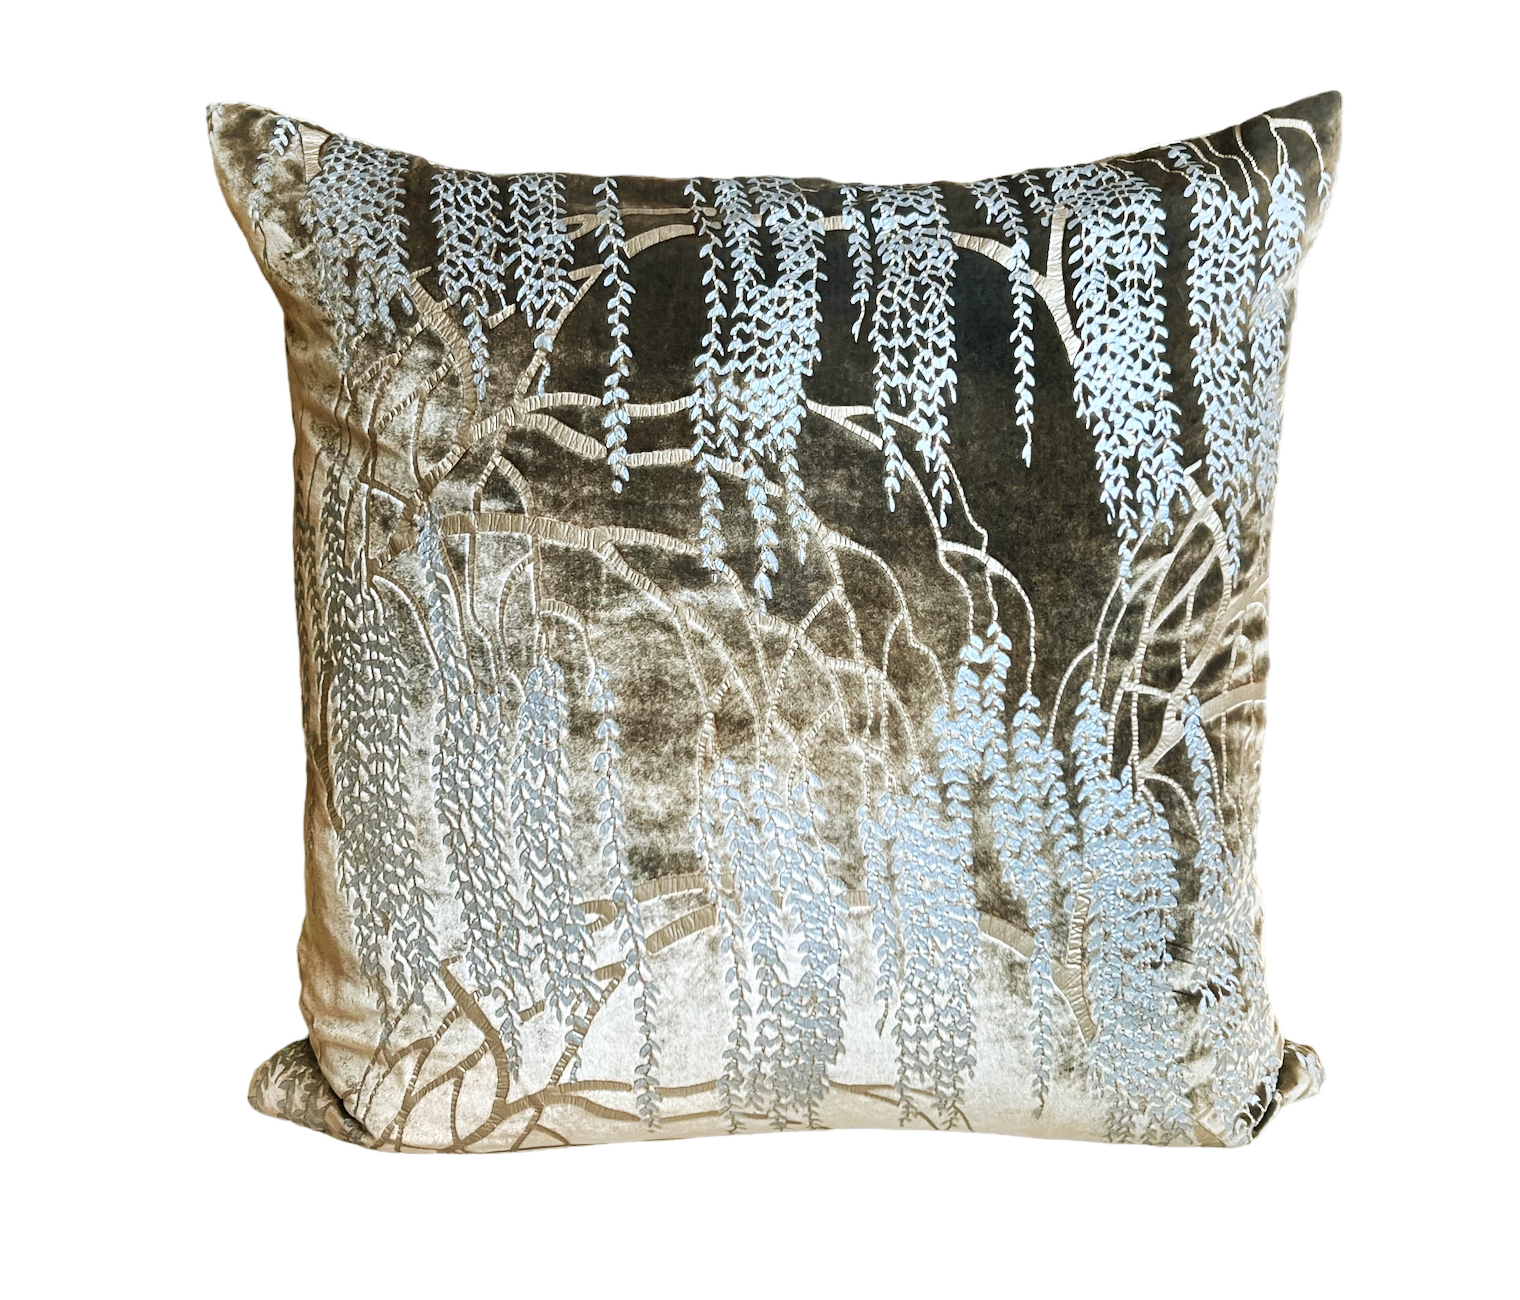 Kevin O'Brien "Willow Copper Ivy" pillow